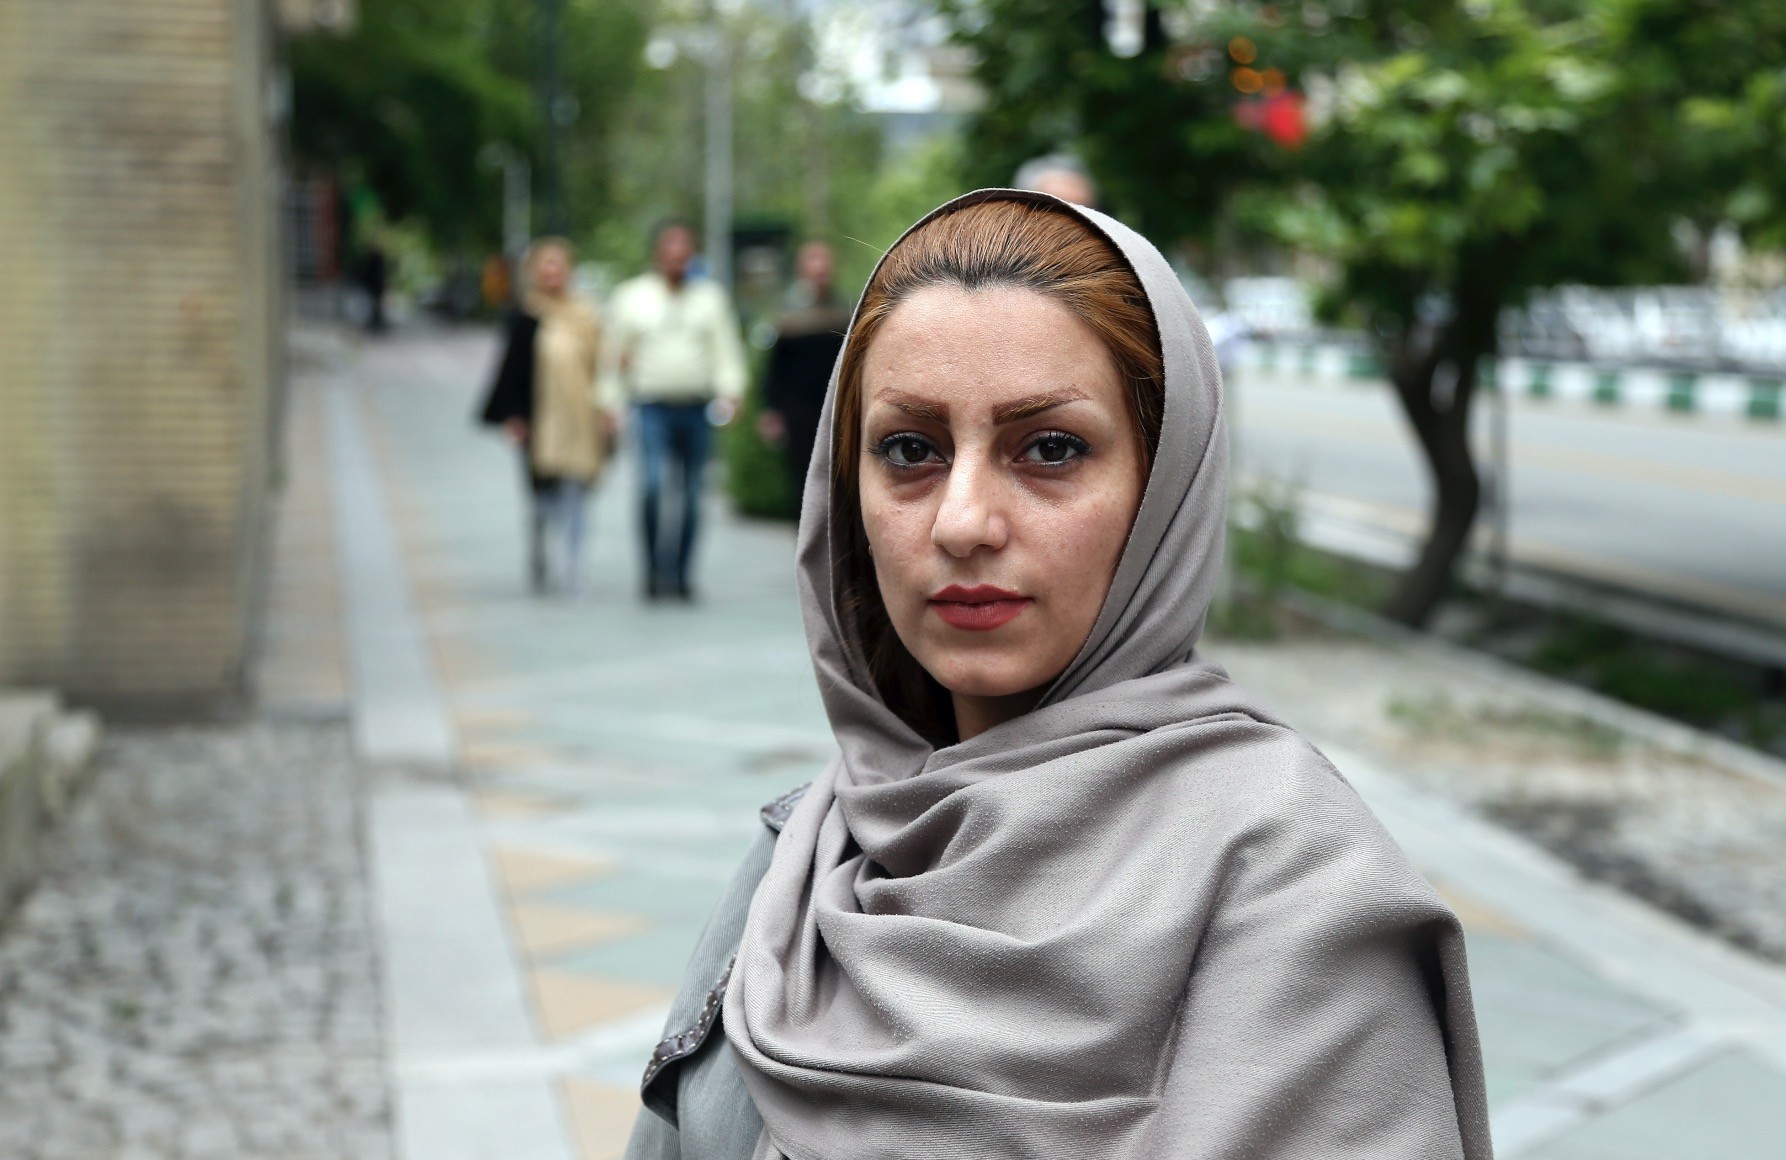 Ladan Shiri, a 33-year-old Iranian sales manager for a private company.